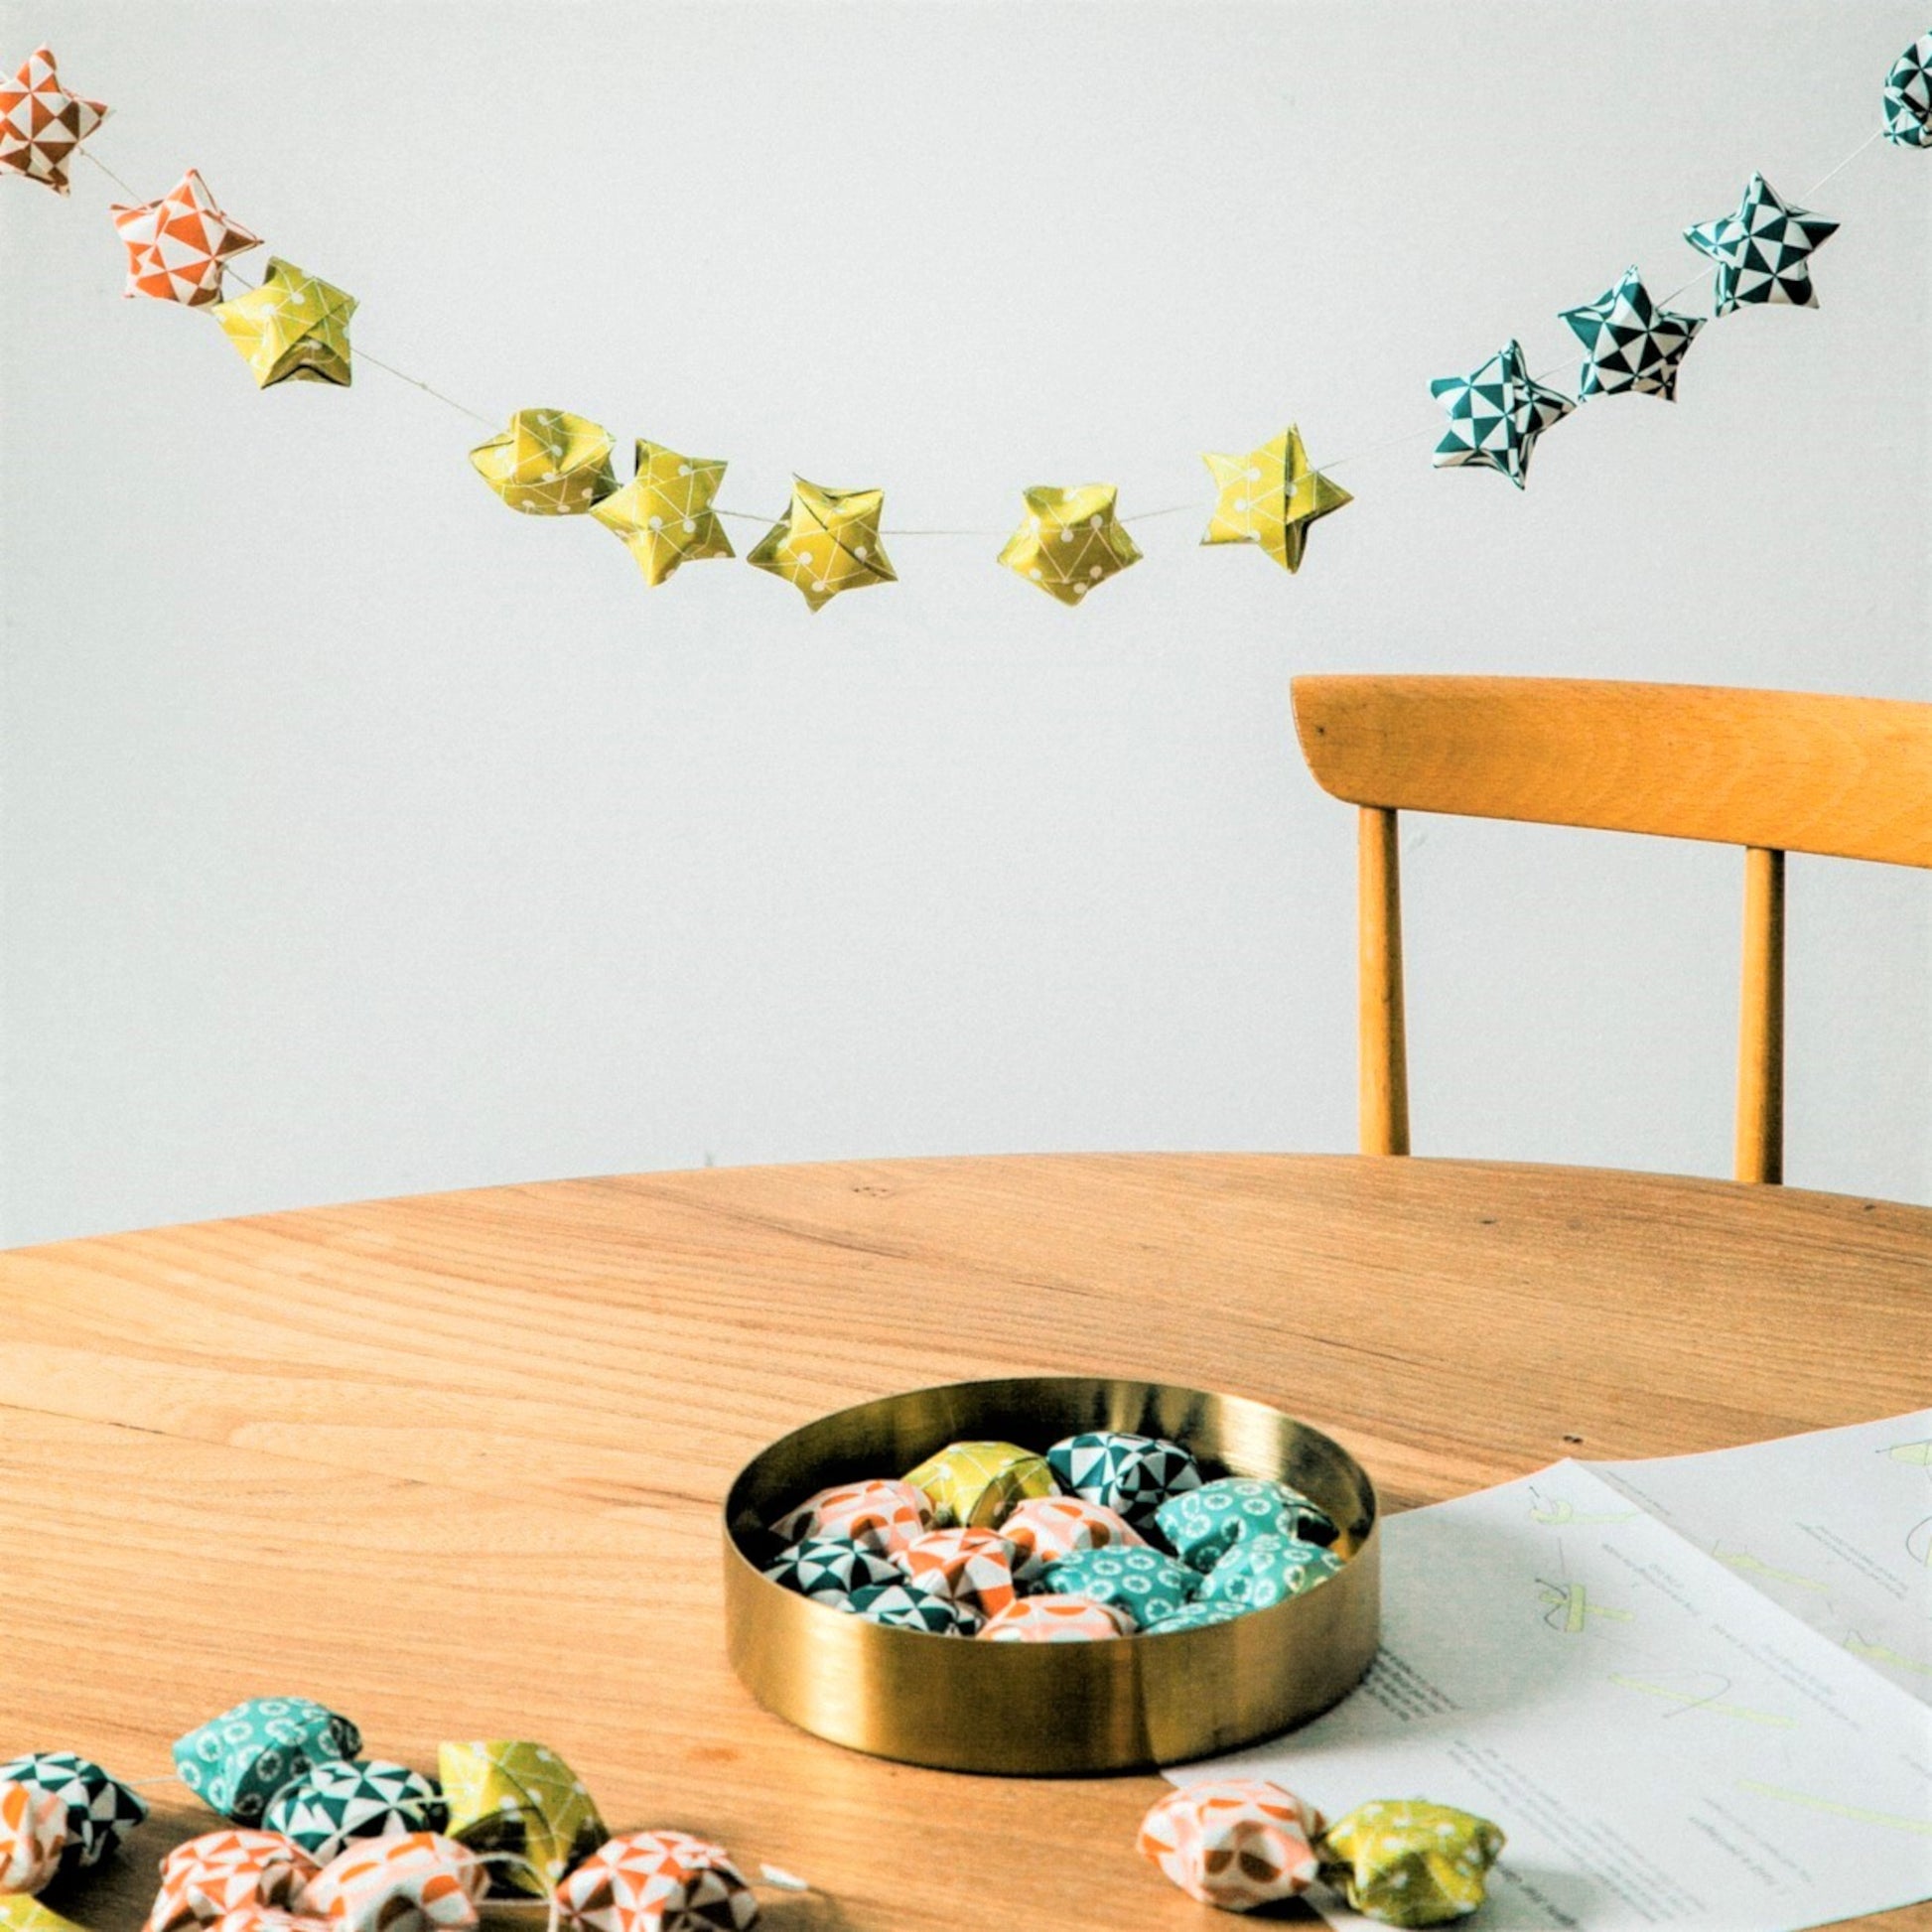 A garland of small paper origami patterned stars "lucky stars" in mustard, teal, aqua and orange, hanging above a table